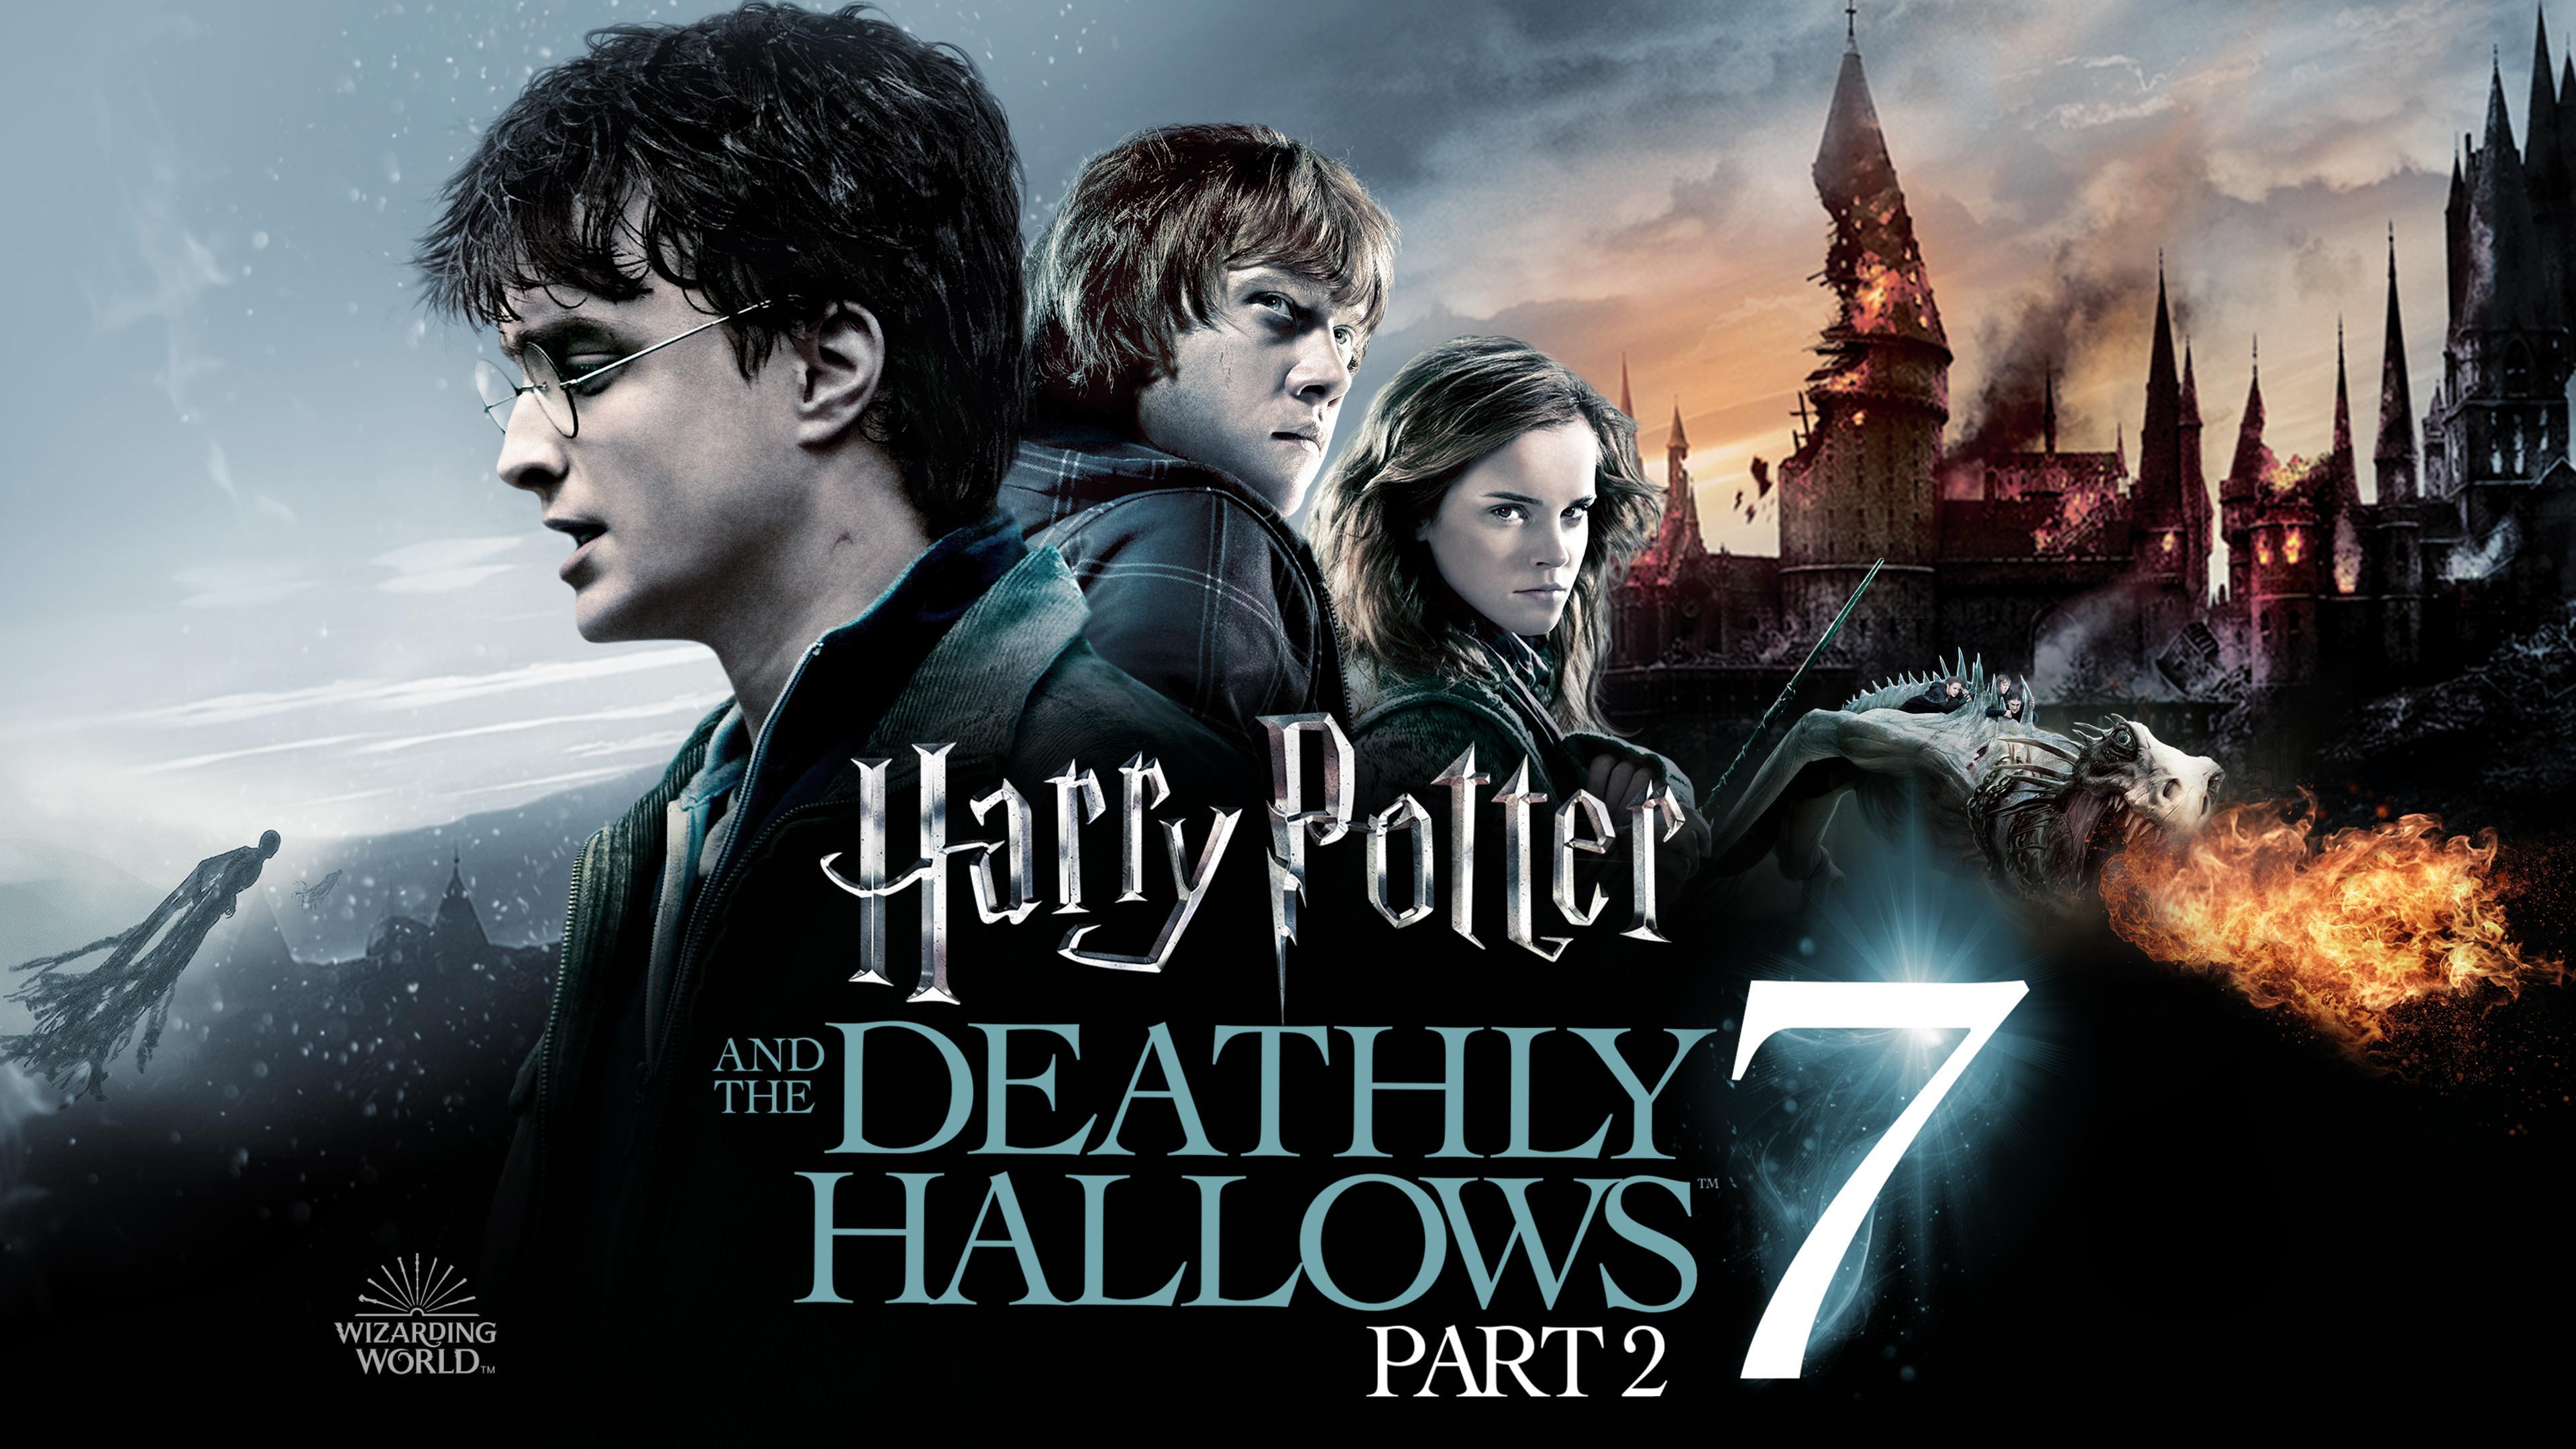 Harry Potter And The Deathly Hallows - Movie Poster (Hogwarts On Fire) (24  X 36)